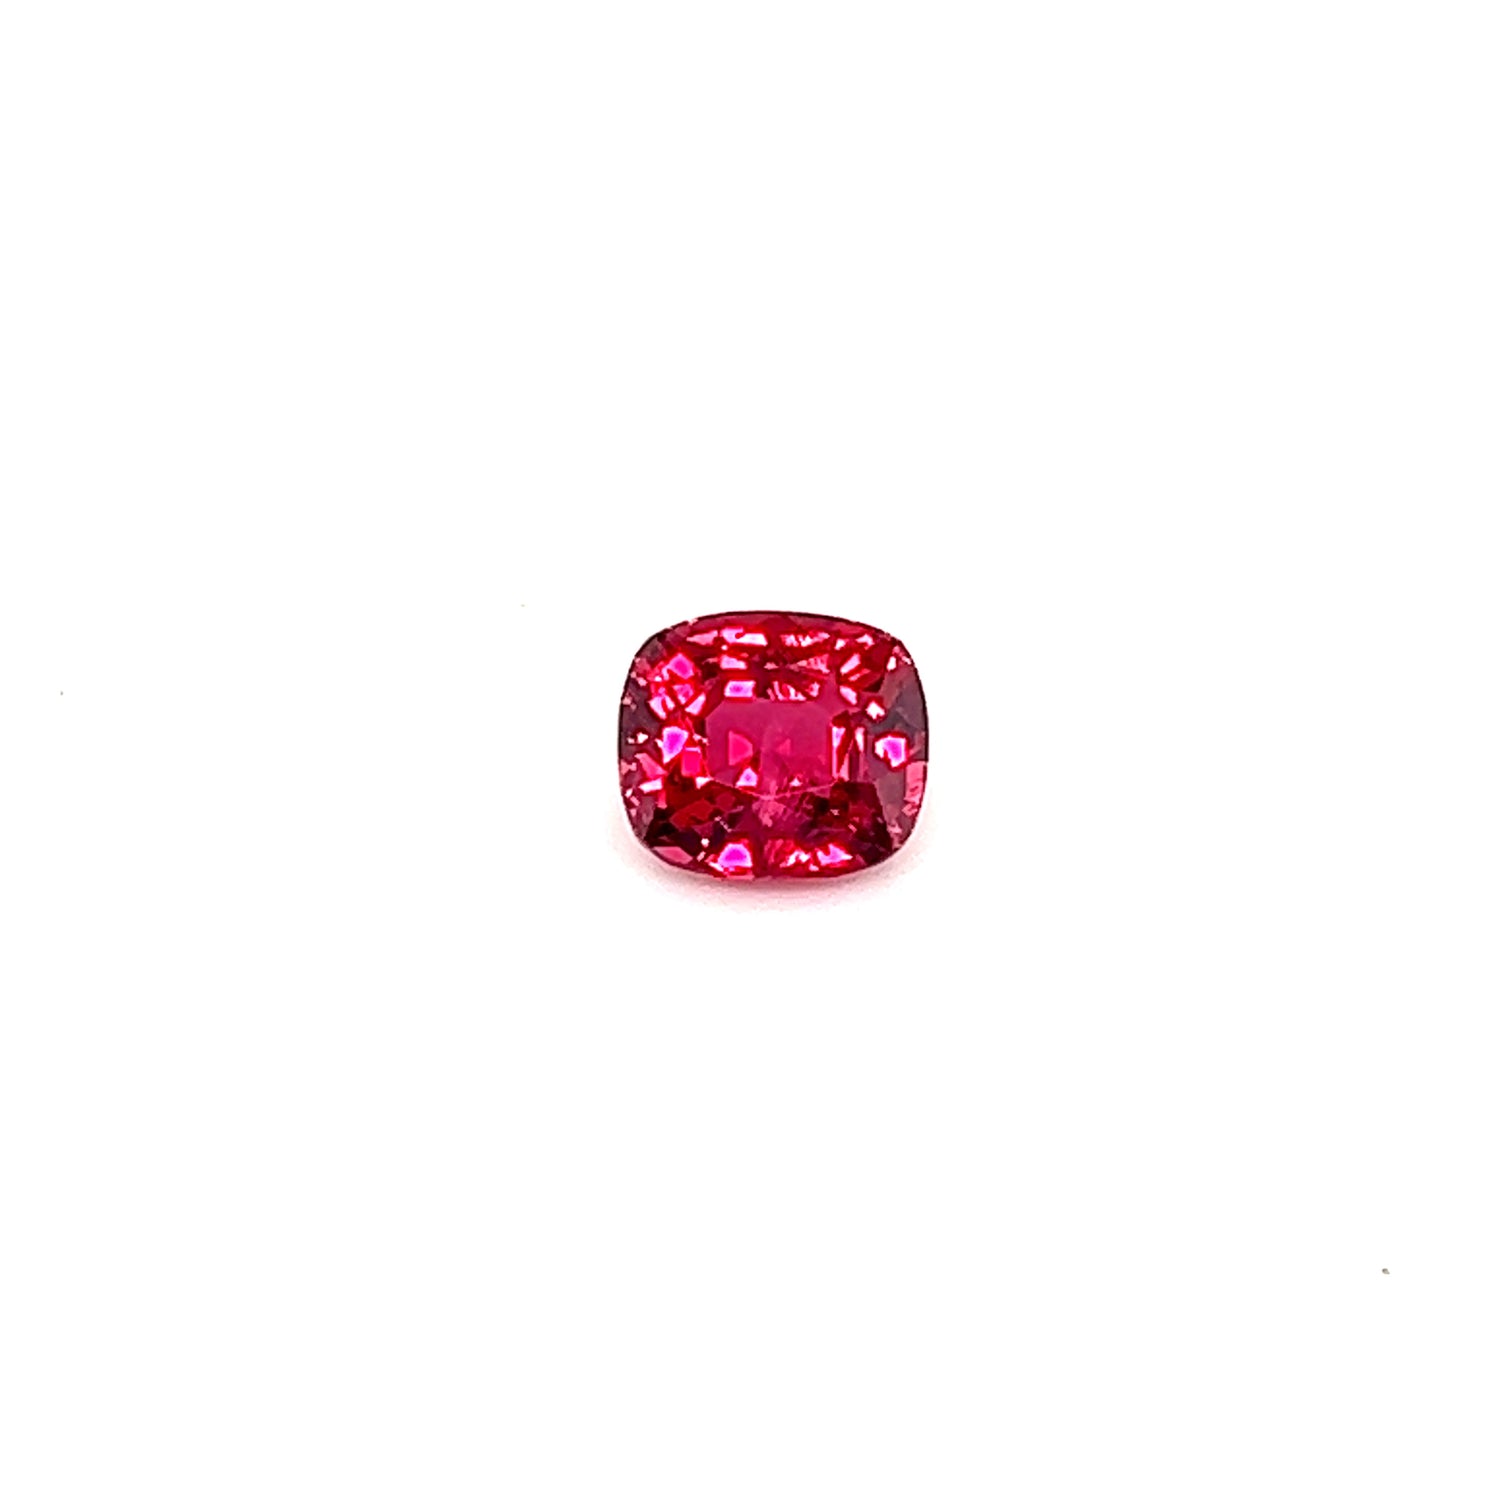 All Spinel